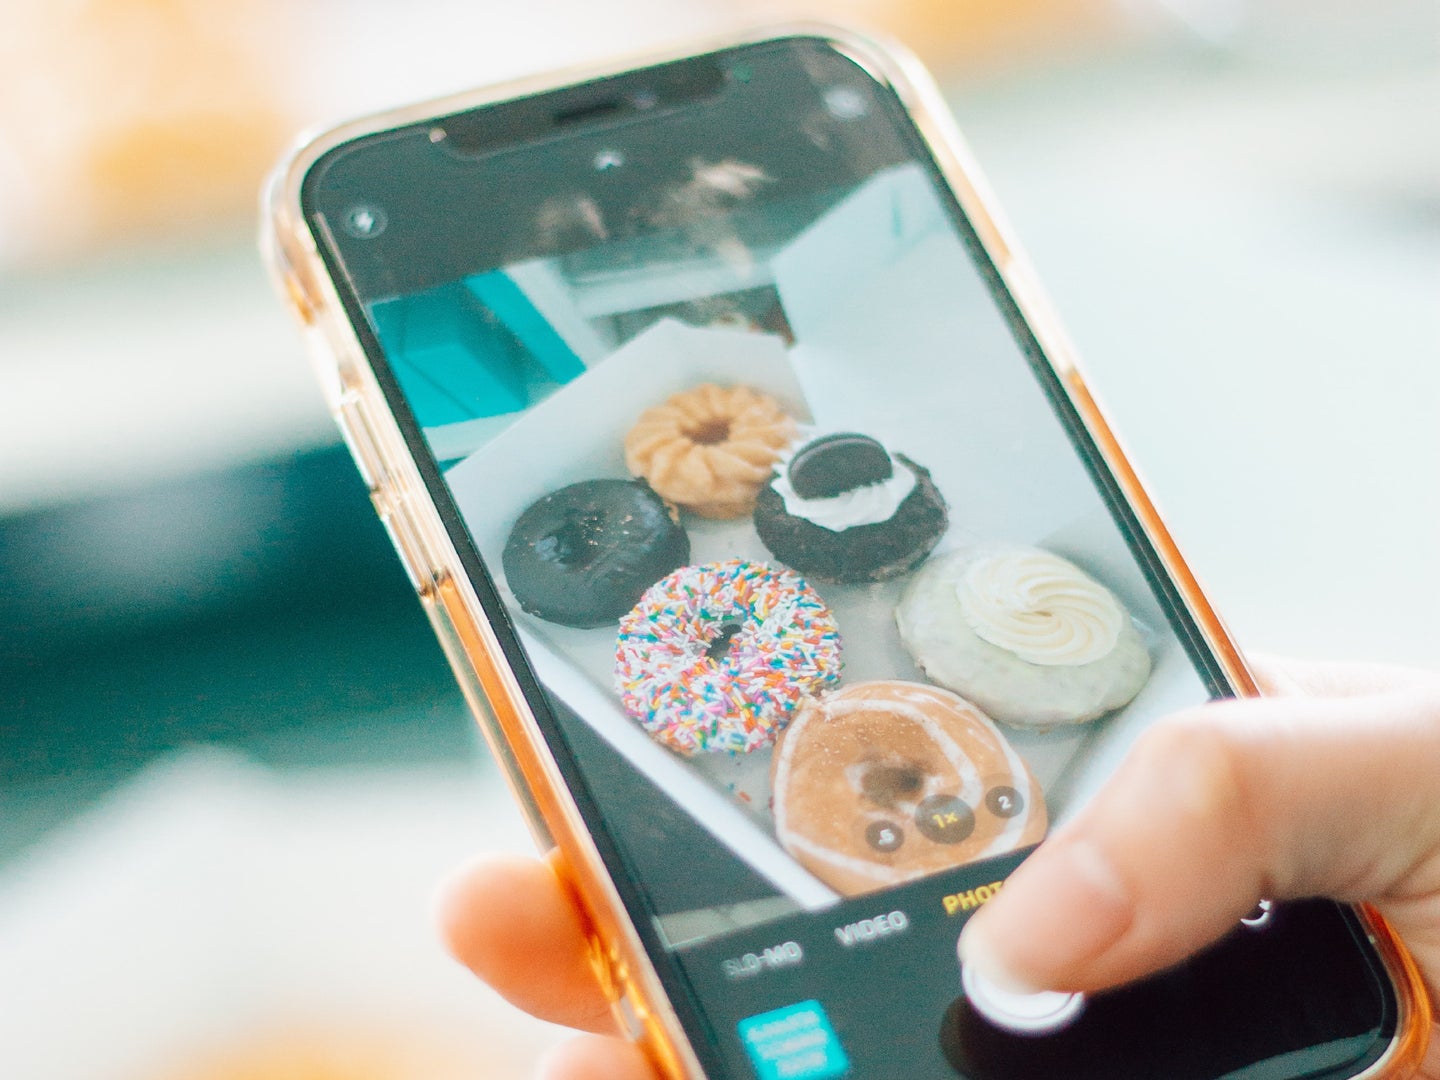 A person holding an iPhone and taking a picture of some doughnuts.